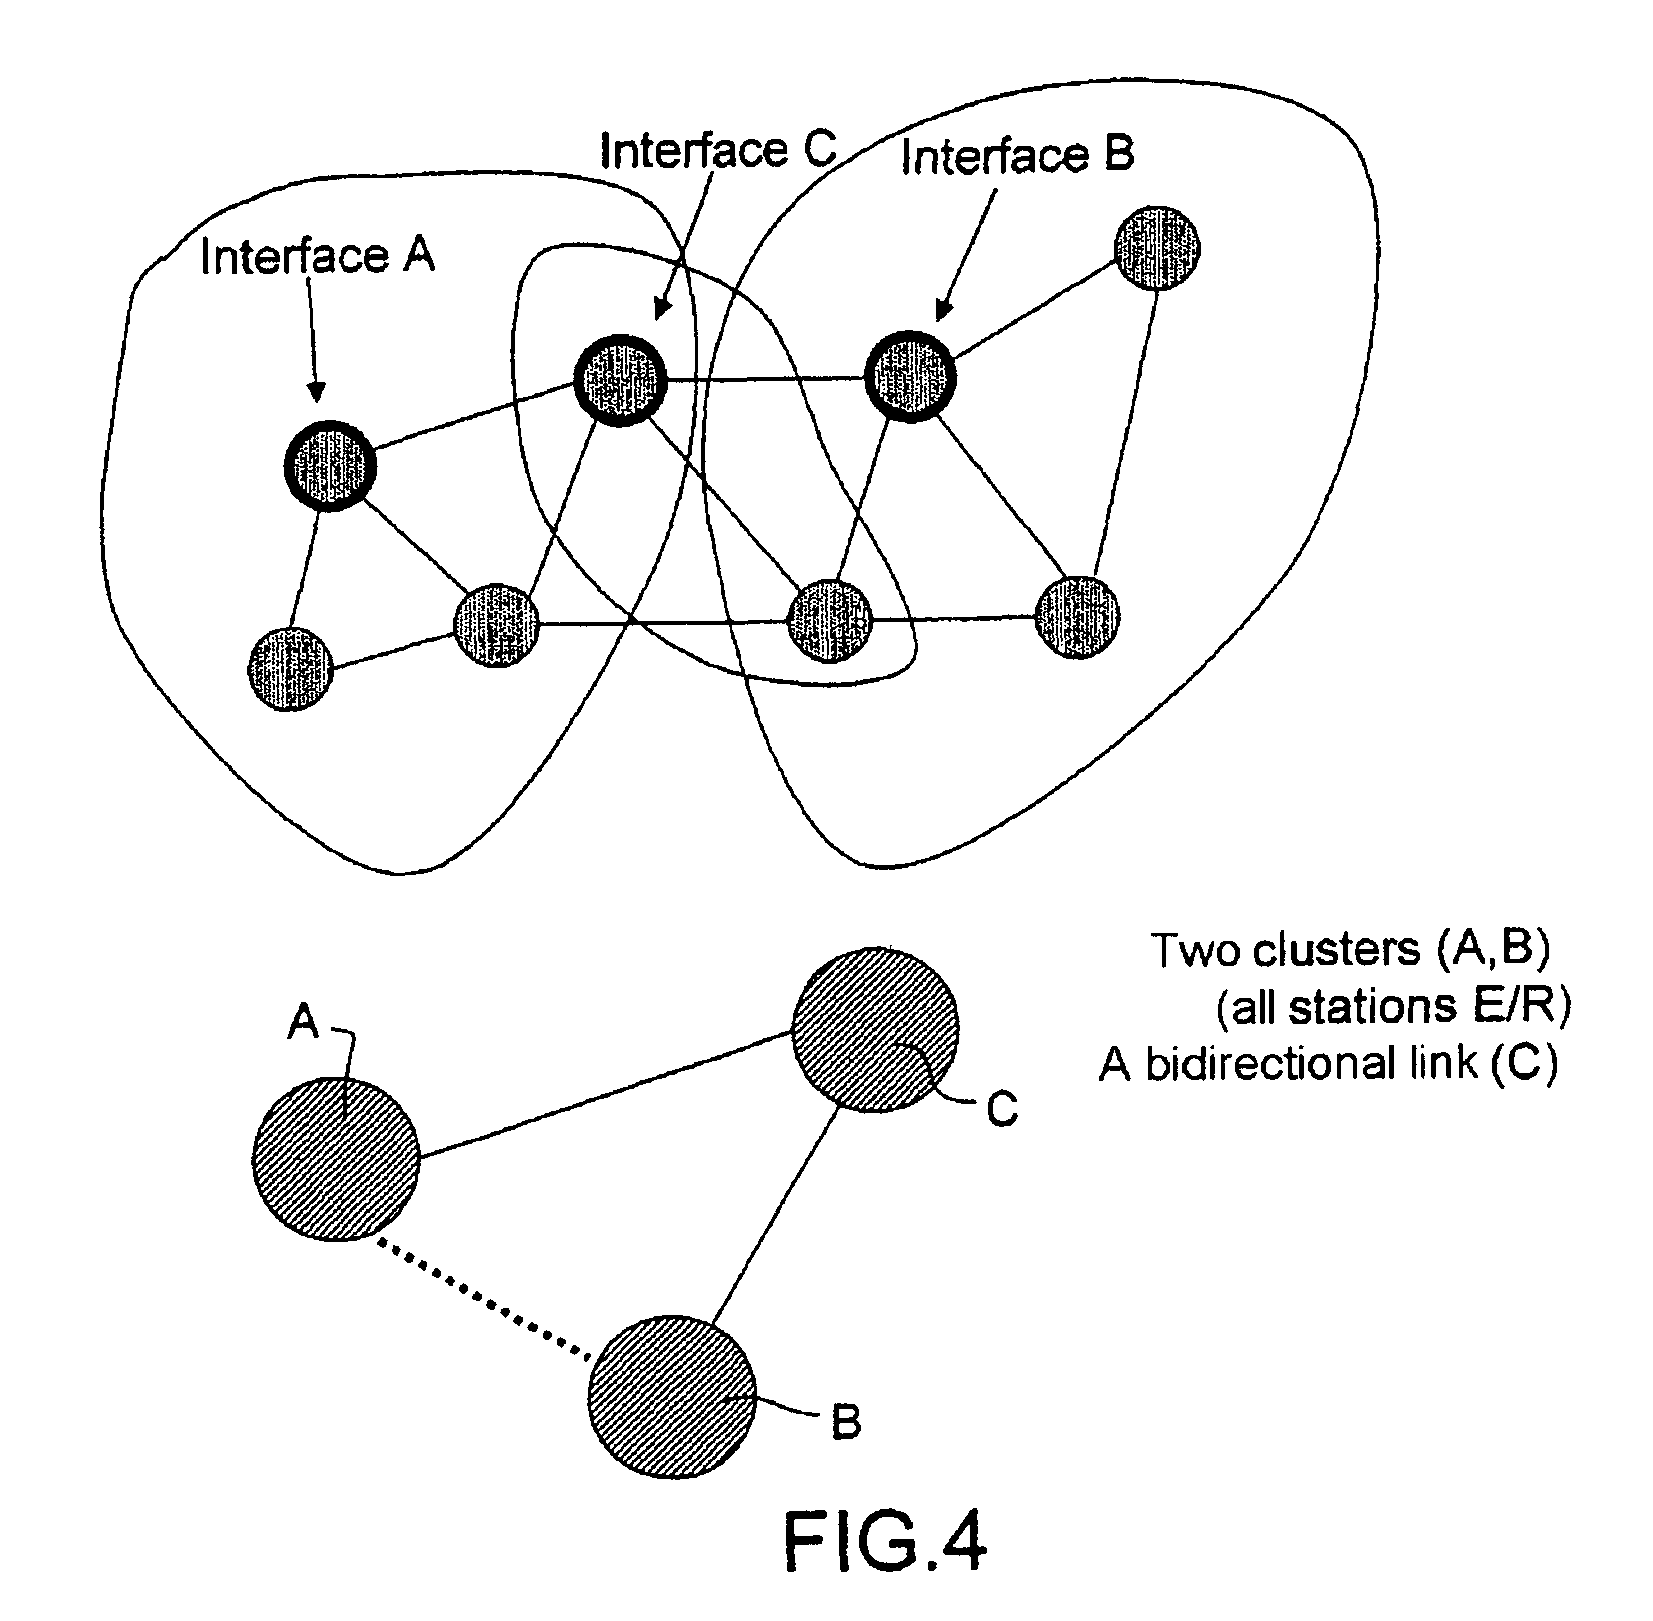 Method for dynamically allocating resources in a network of station clusters